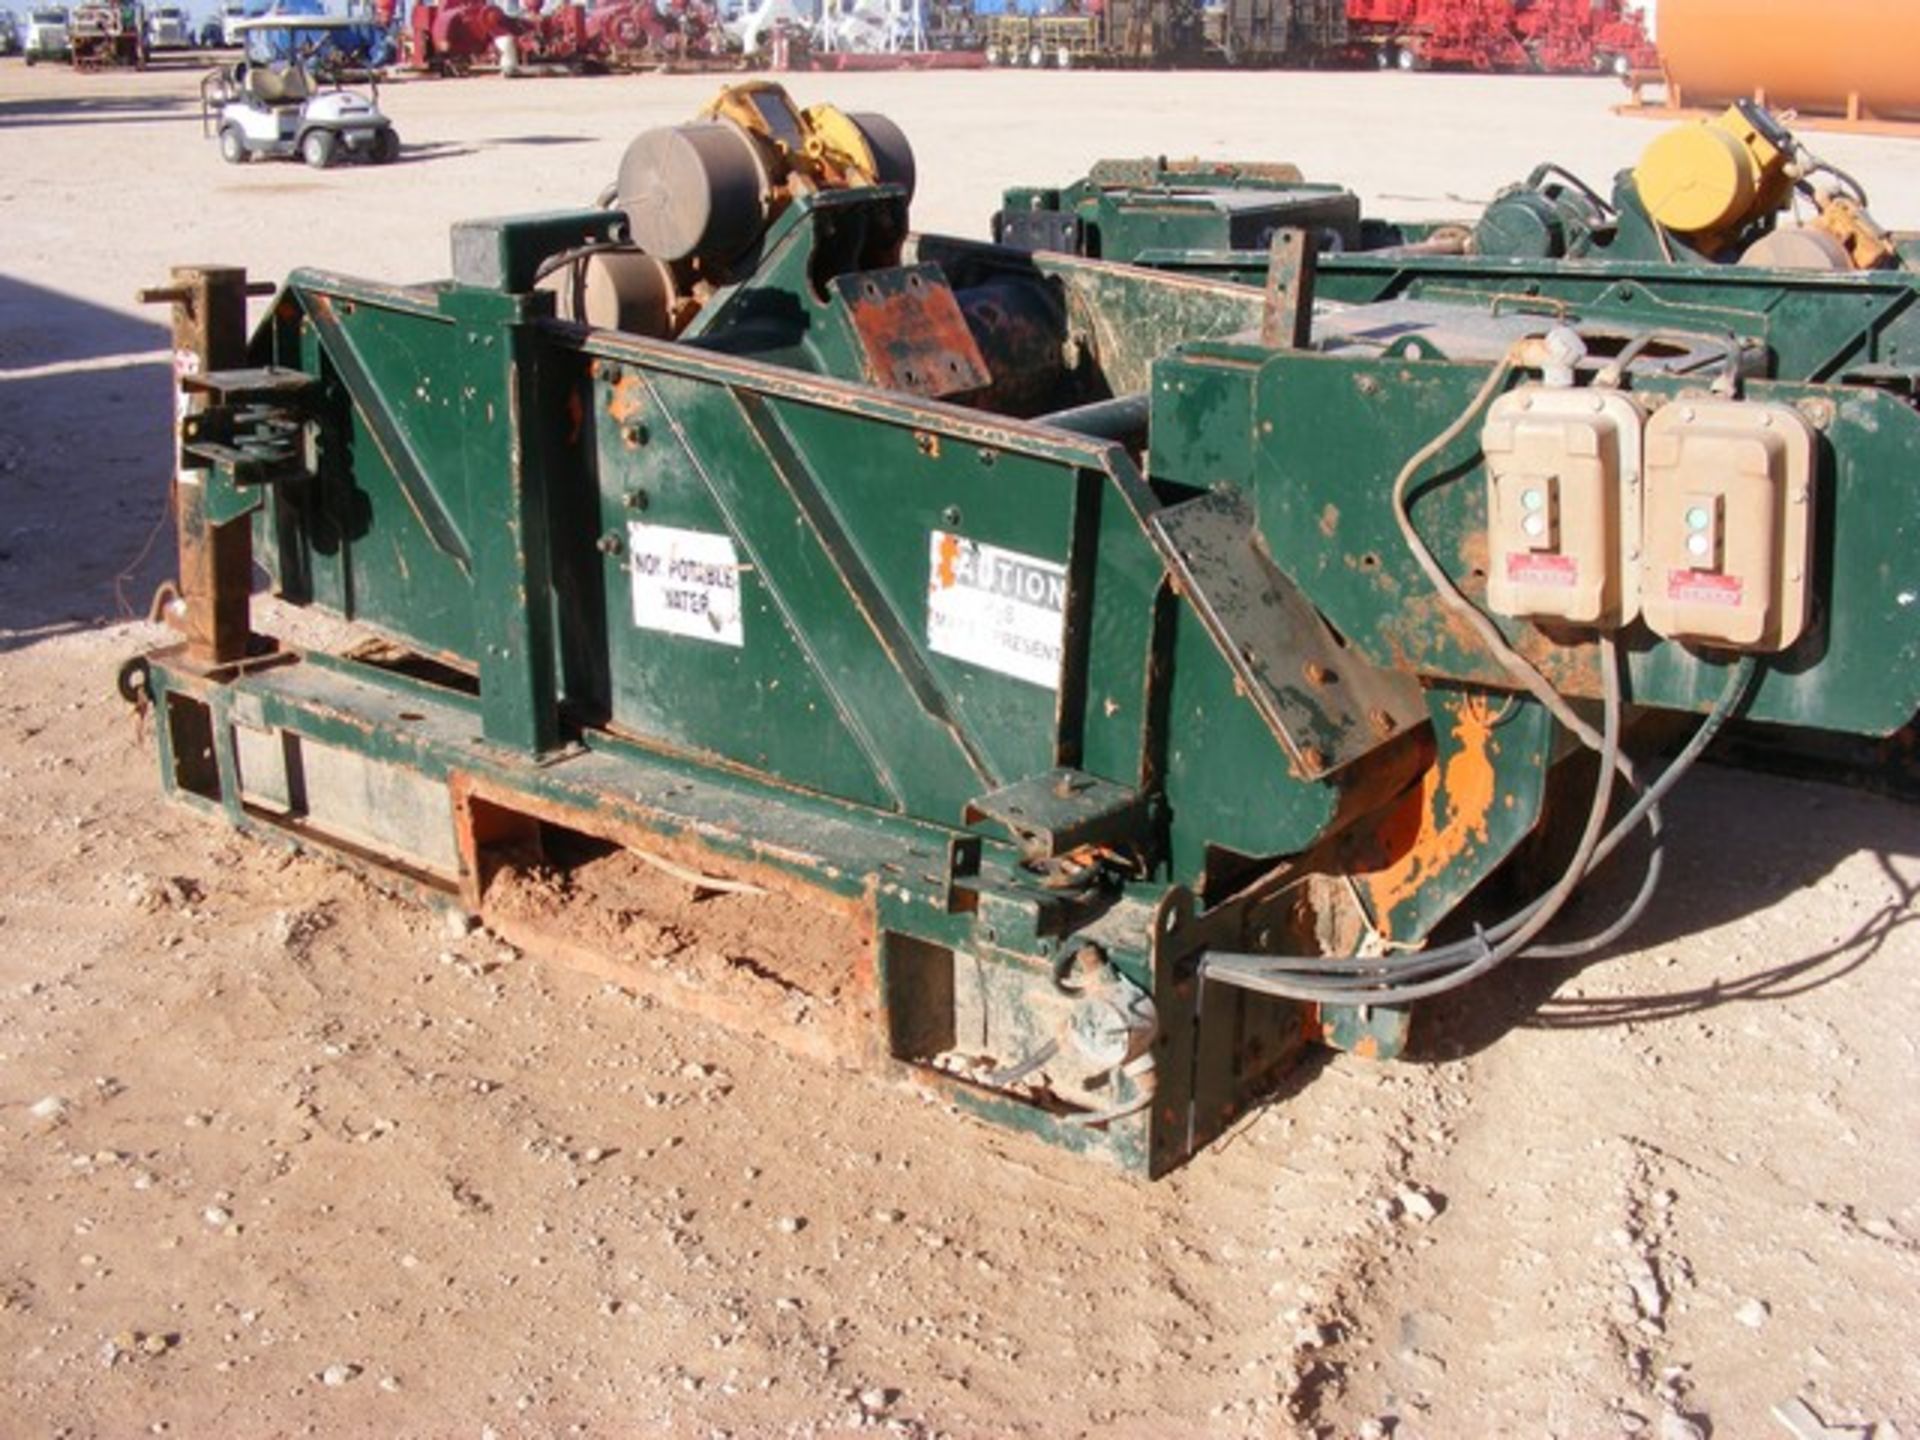 Located in YARD 1 - Midland, TX MI SWACO SINGLE 4 PANEL LINEAR MOTION SHALE SHAKER (6086) - Image 2 of 3